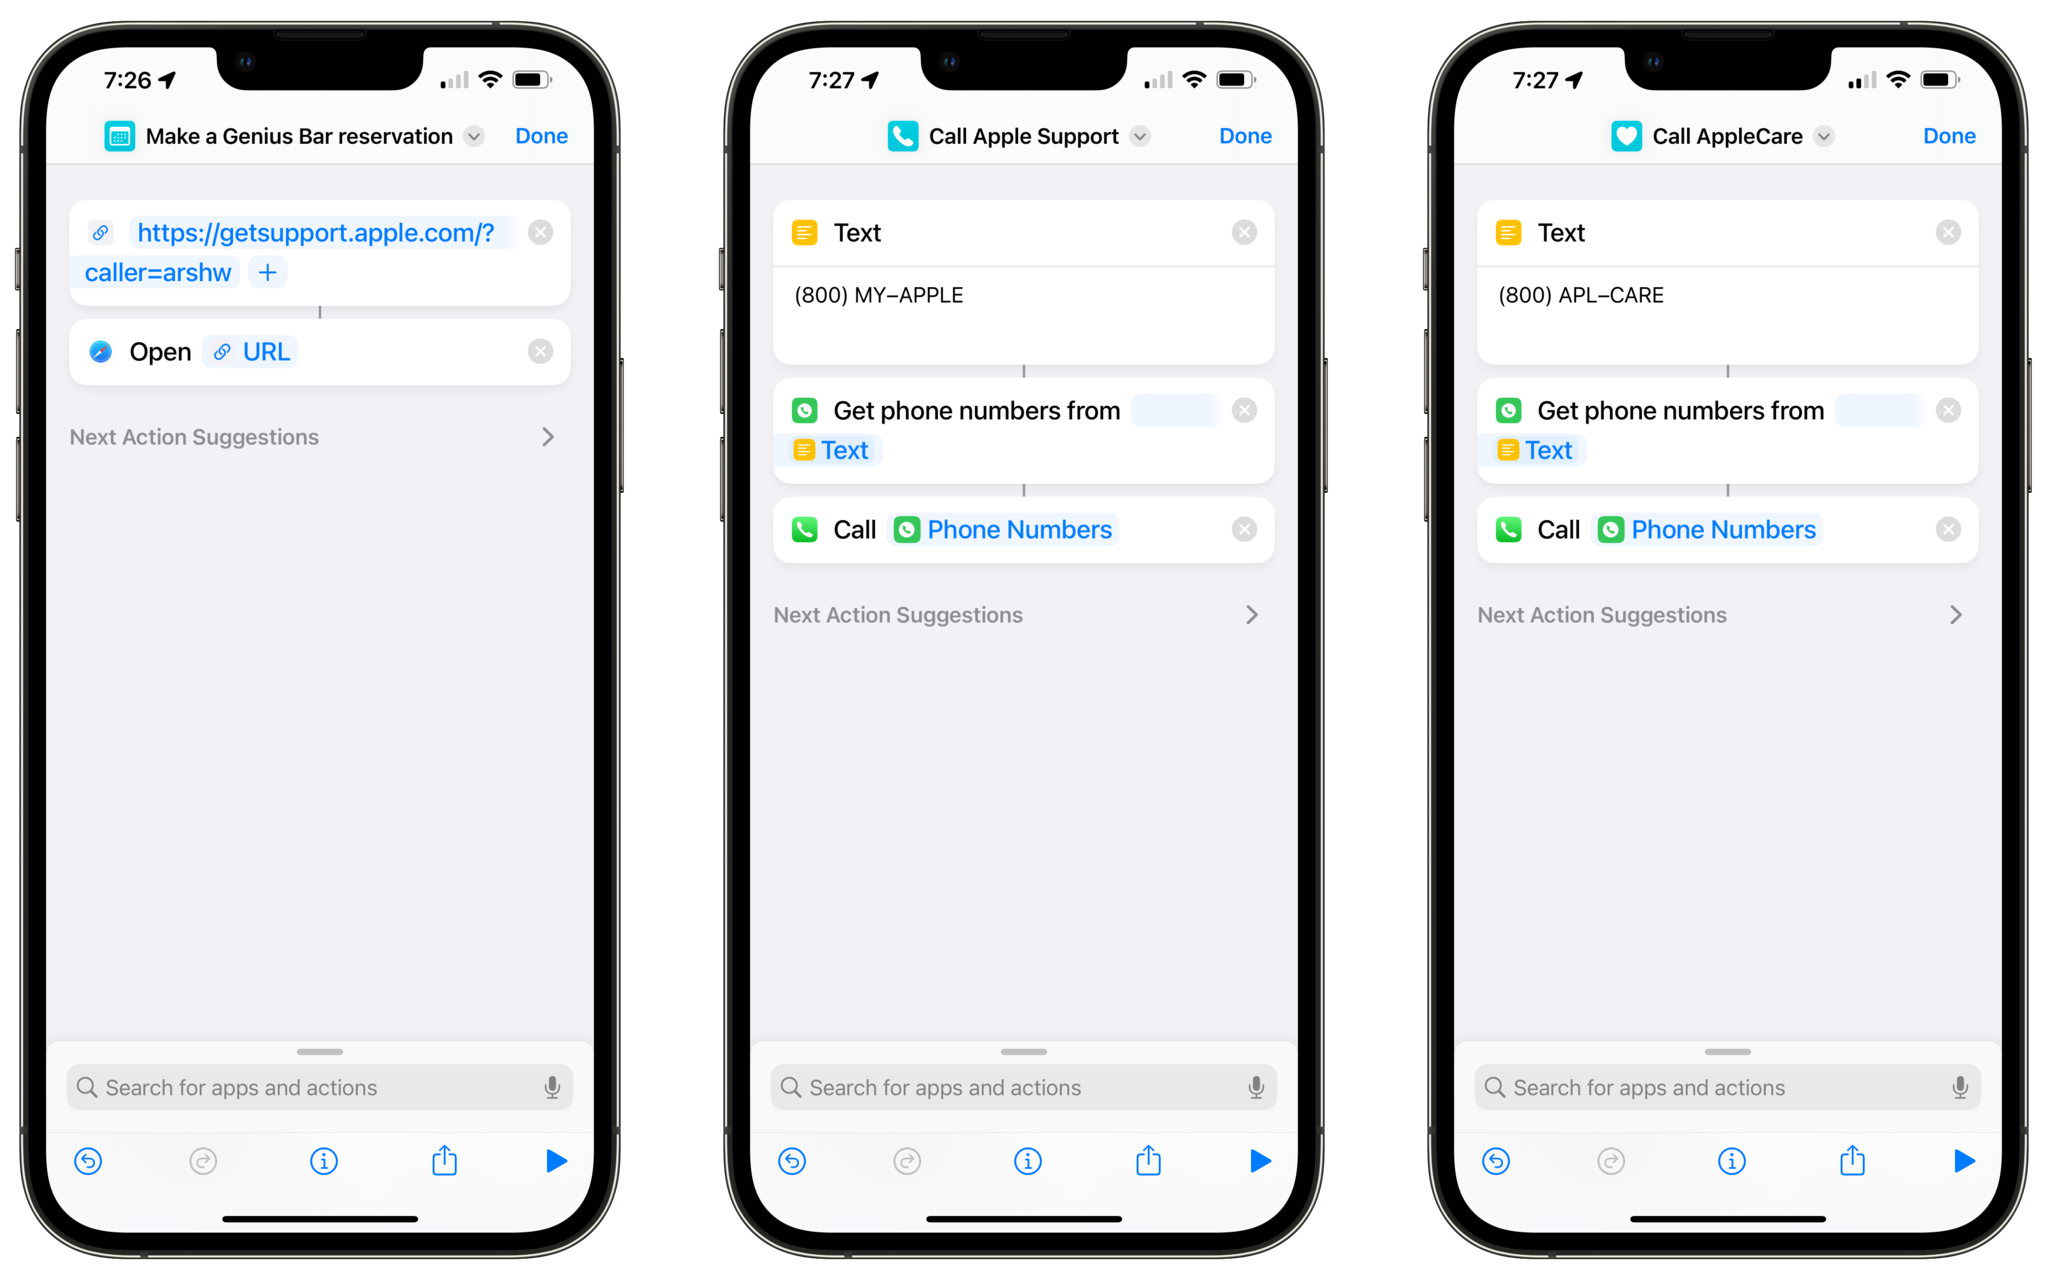 Set of three screenshots showing the actions for Make a Genius Bar reservation shortcut and the Call Apple Support & Call AppleCare shortcuts.